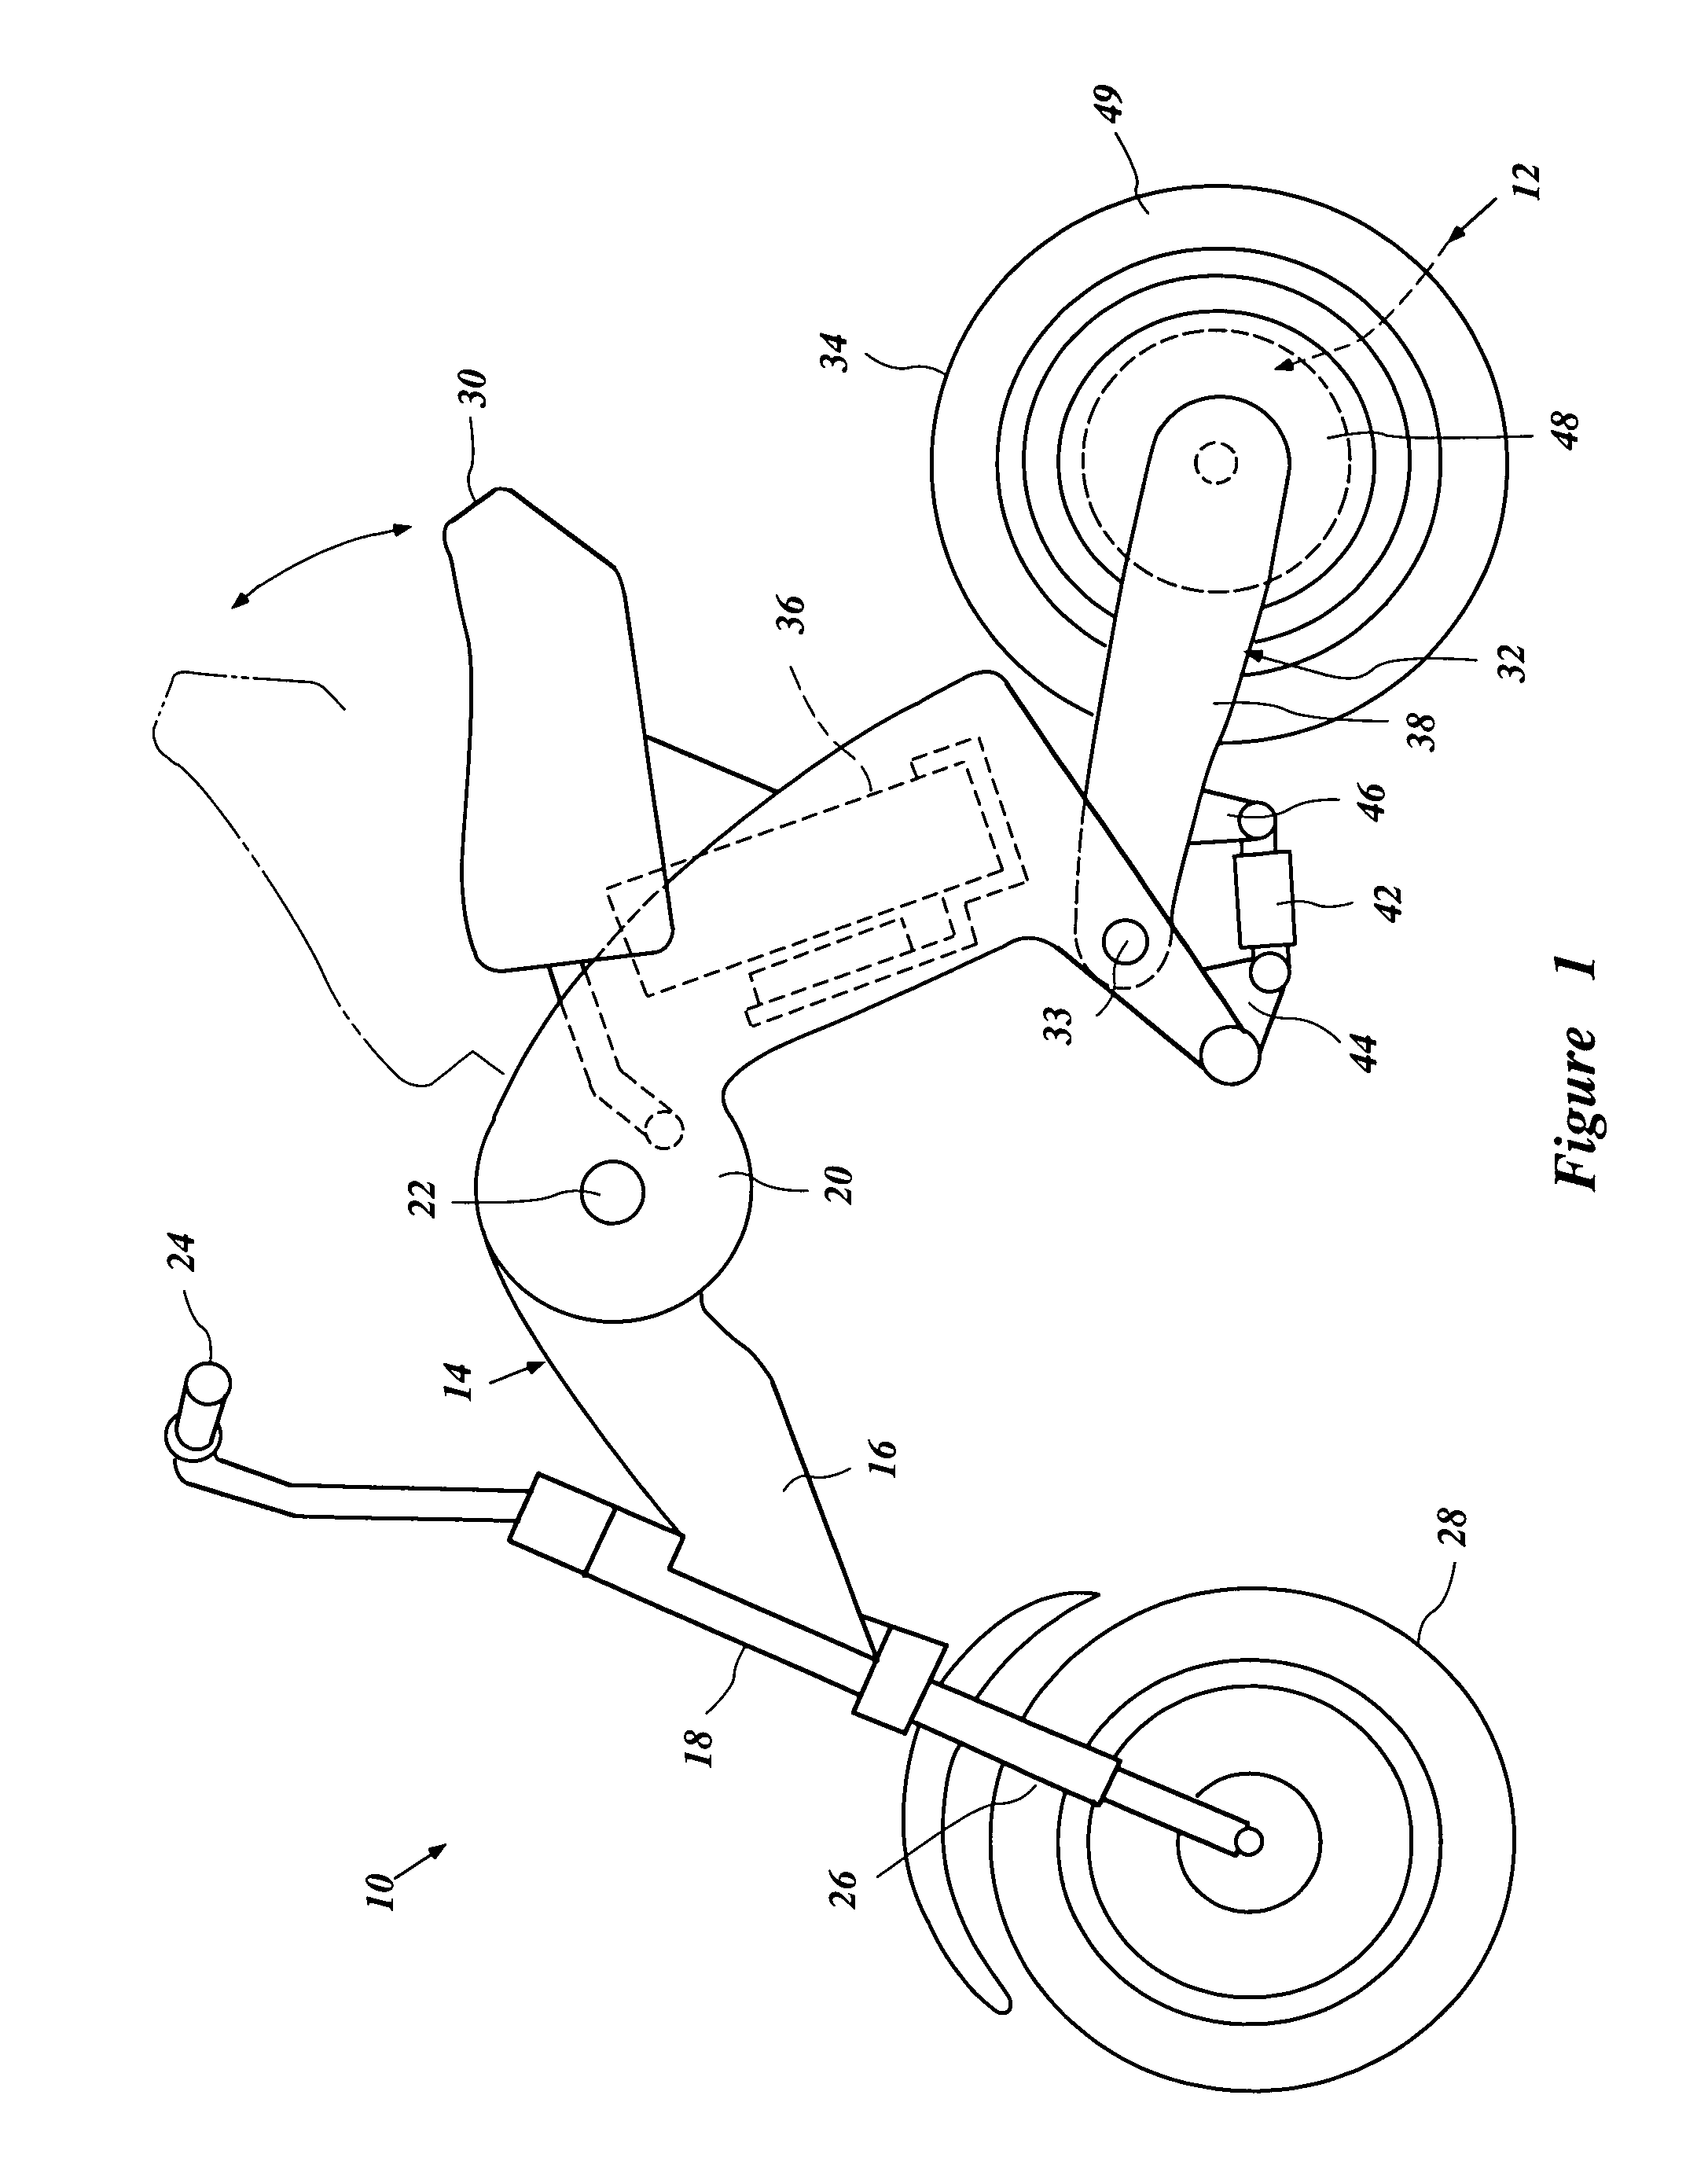 Electrically operated power unit, electric vehicle and electric motorcycle